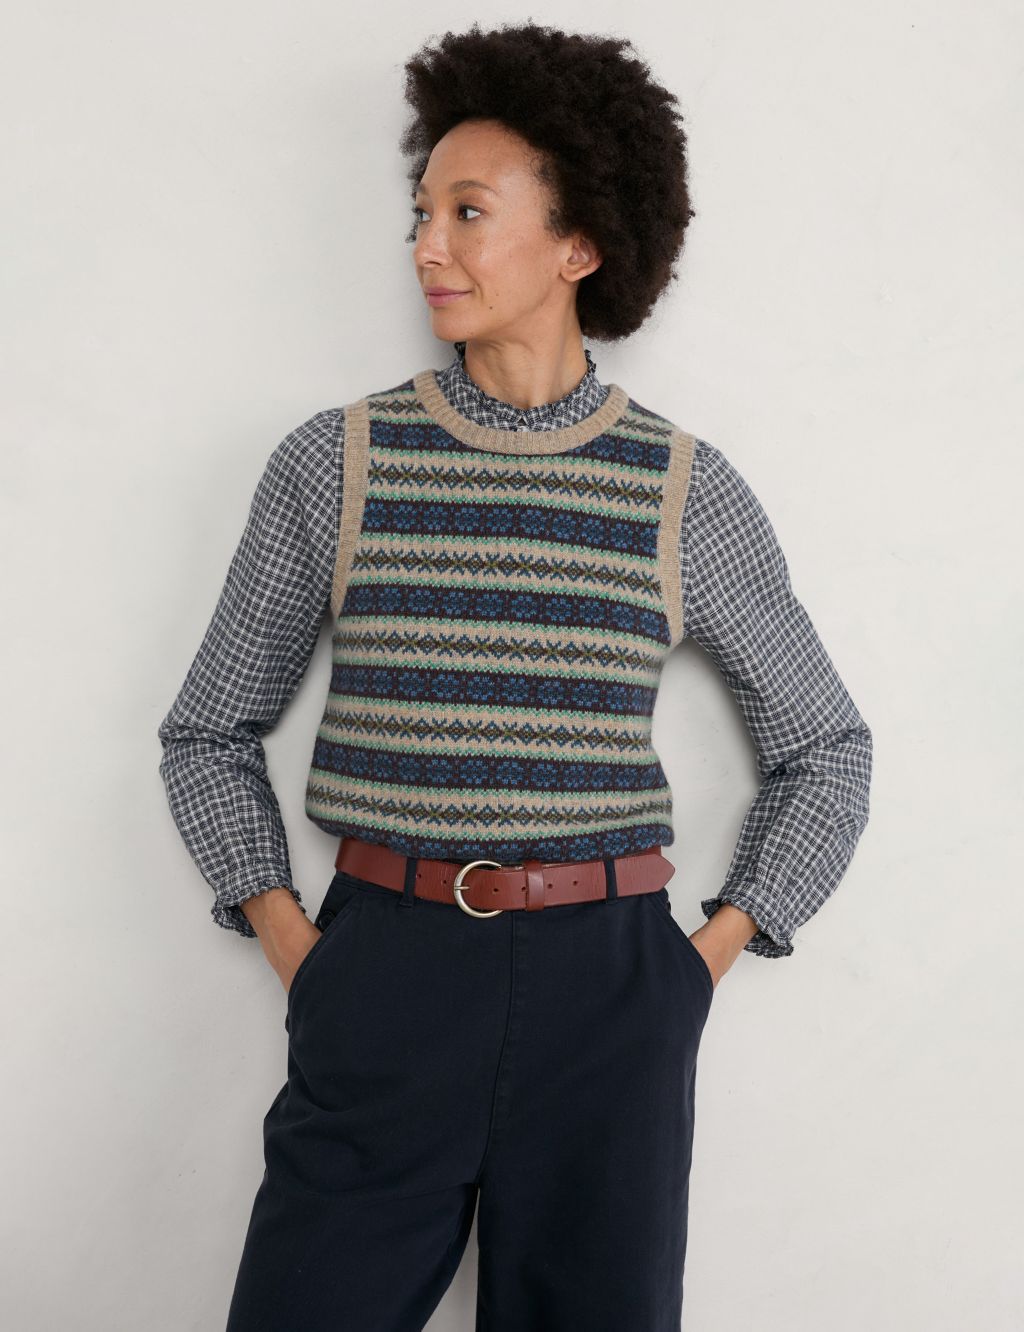 Merino Wool Rich Striped Knitted Vest image 1